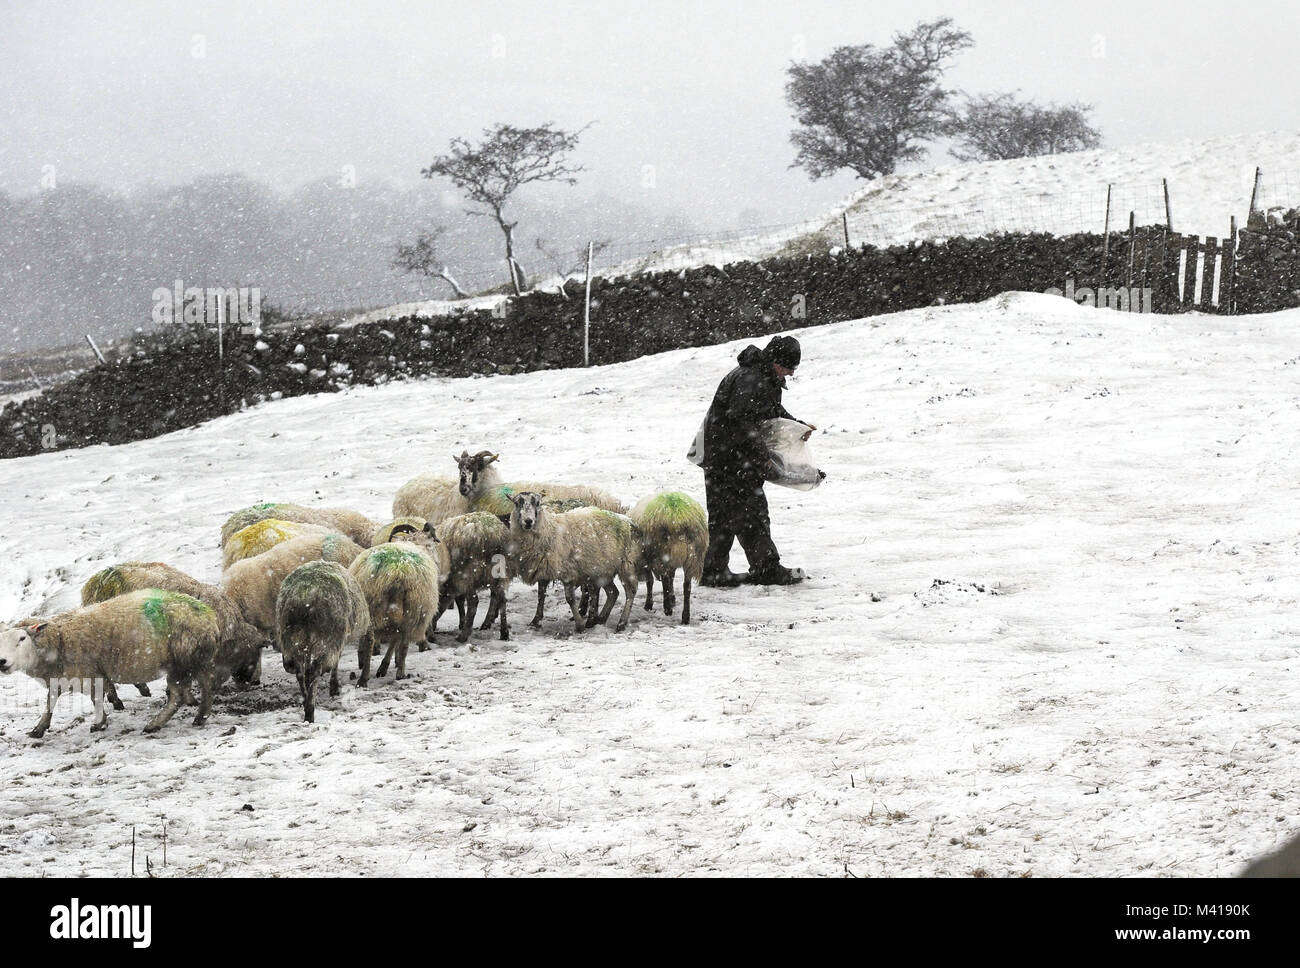 Yorkshire Dales farmer Andrew Coates brings feed in heavy snow to some of the two and a half thousand sheep he looks after on the fells between Hawes and Garsdale, North Yorkshire, as forecasters have issued a series of yellow weather warnings which affect large areas of the country. Stock Photo